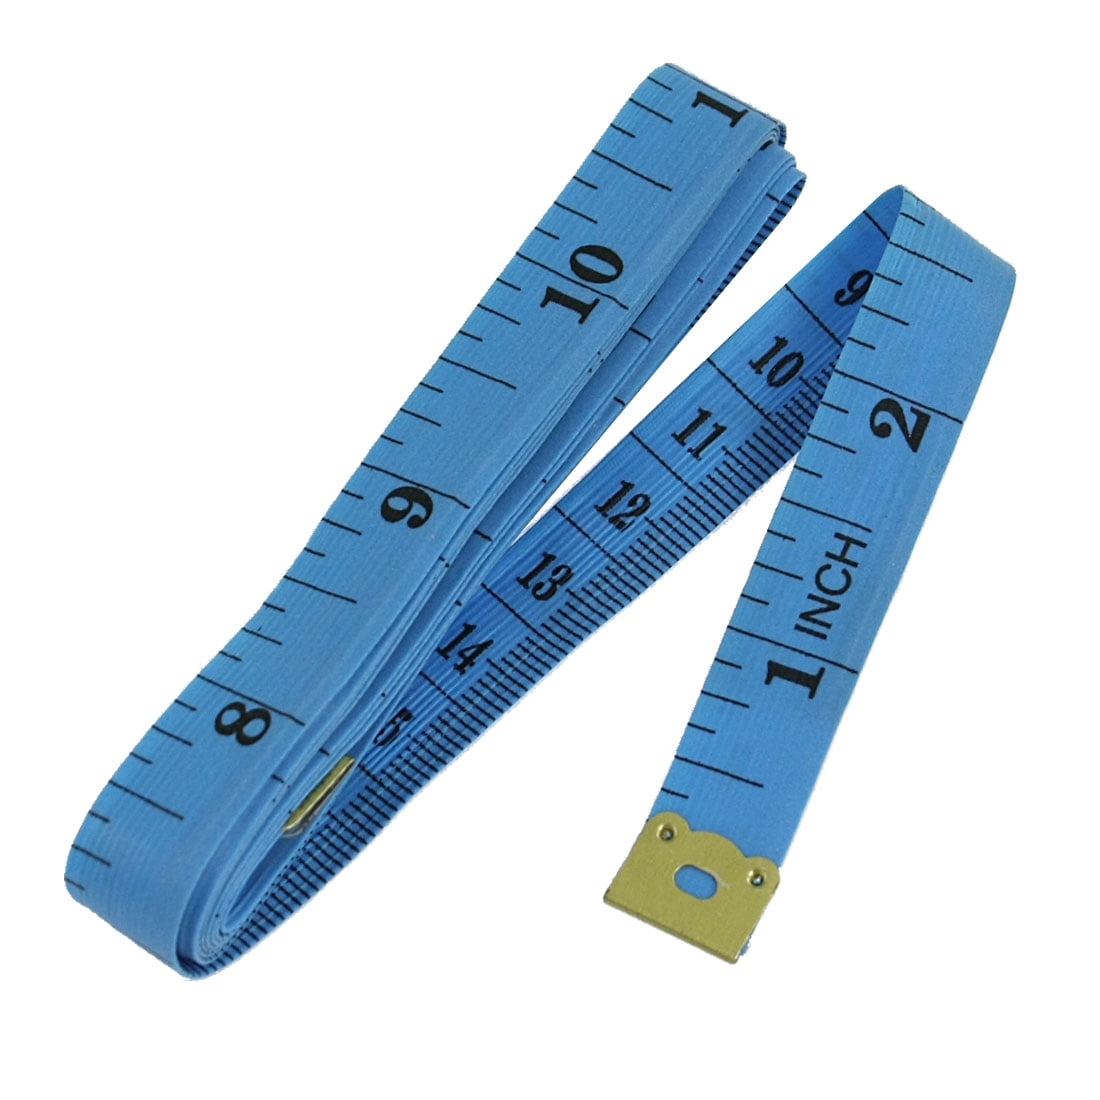 Retractable Cloth Sewing Tools Tailor Ruler Soft Tape Measures With Print Bag HO 